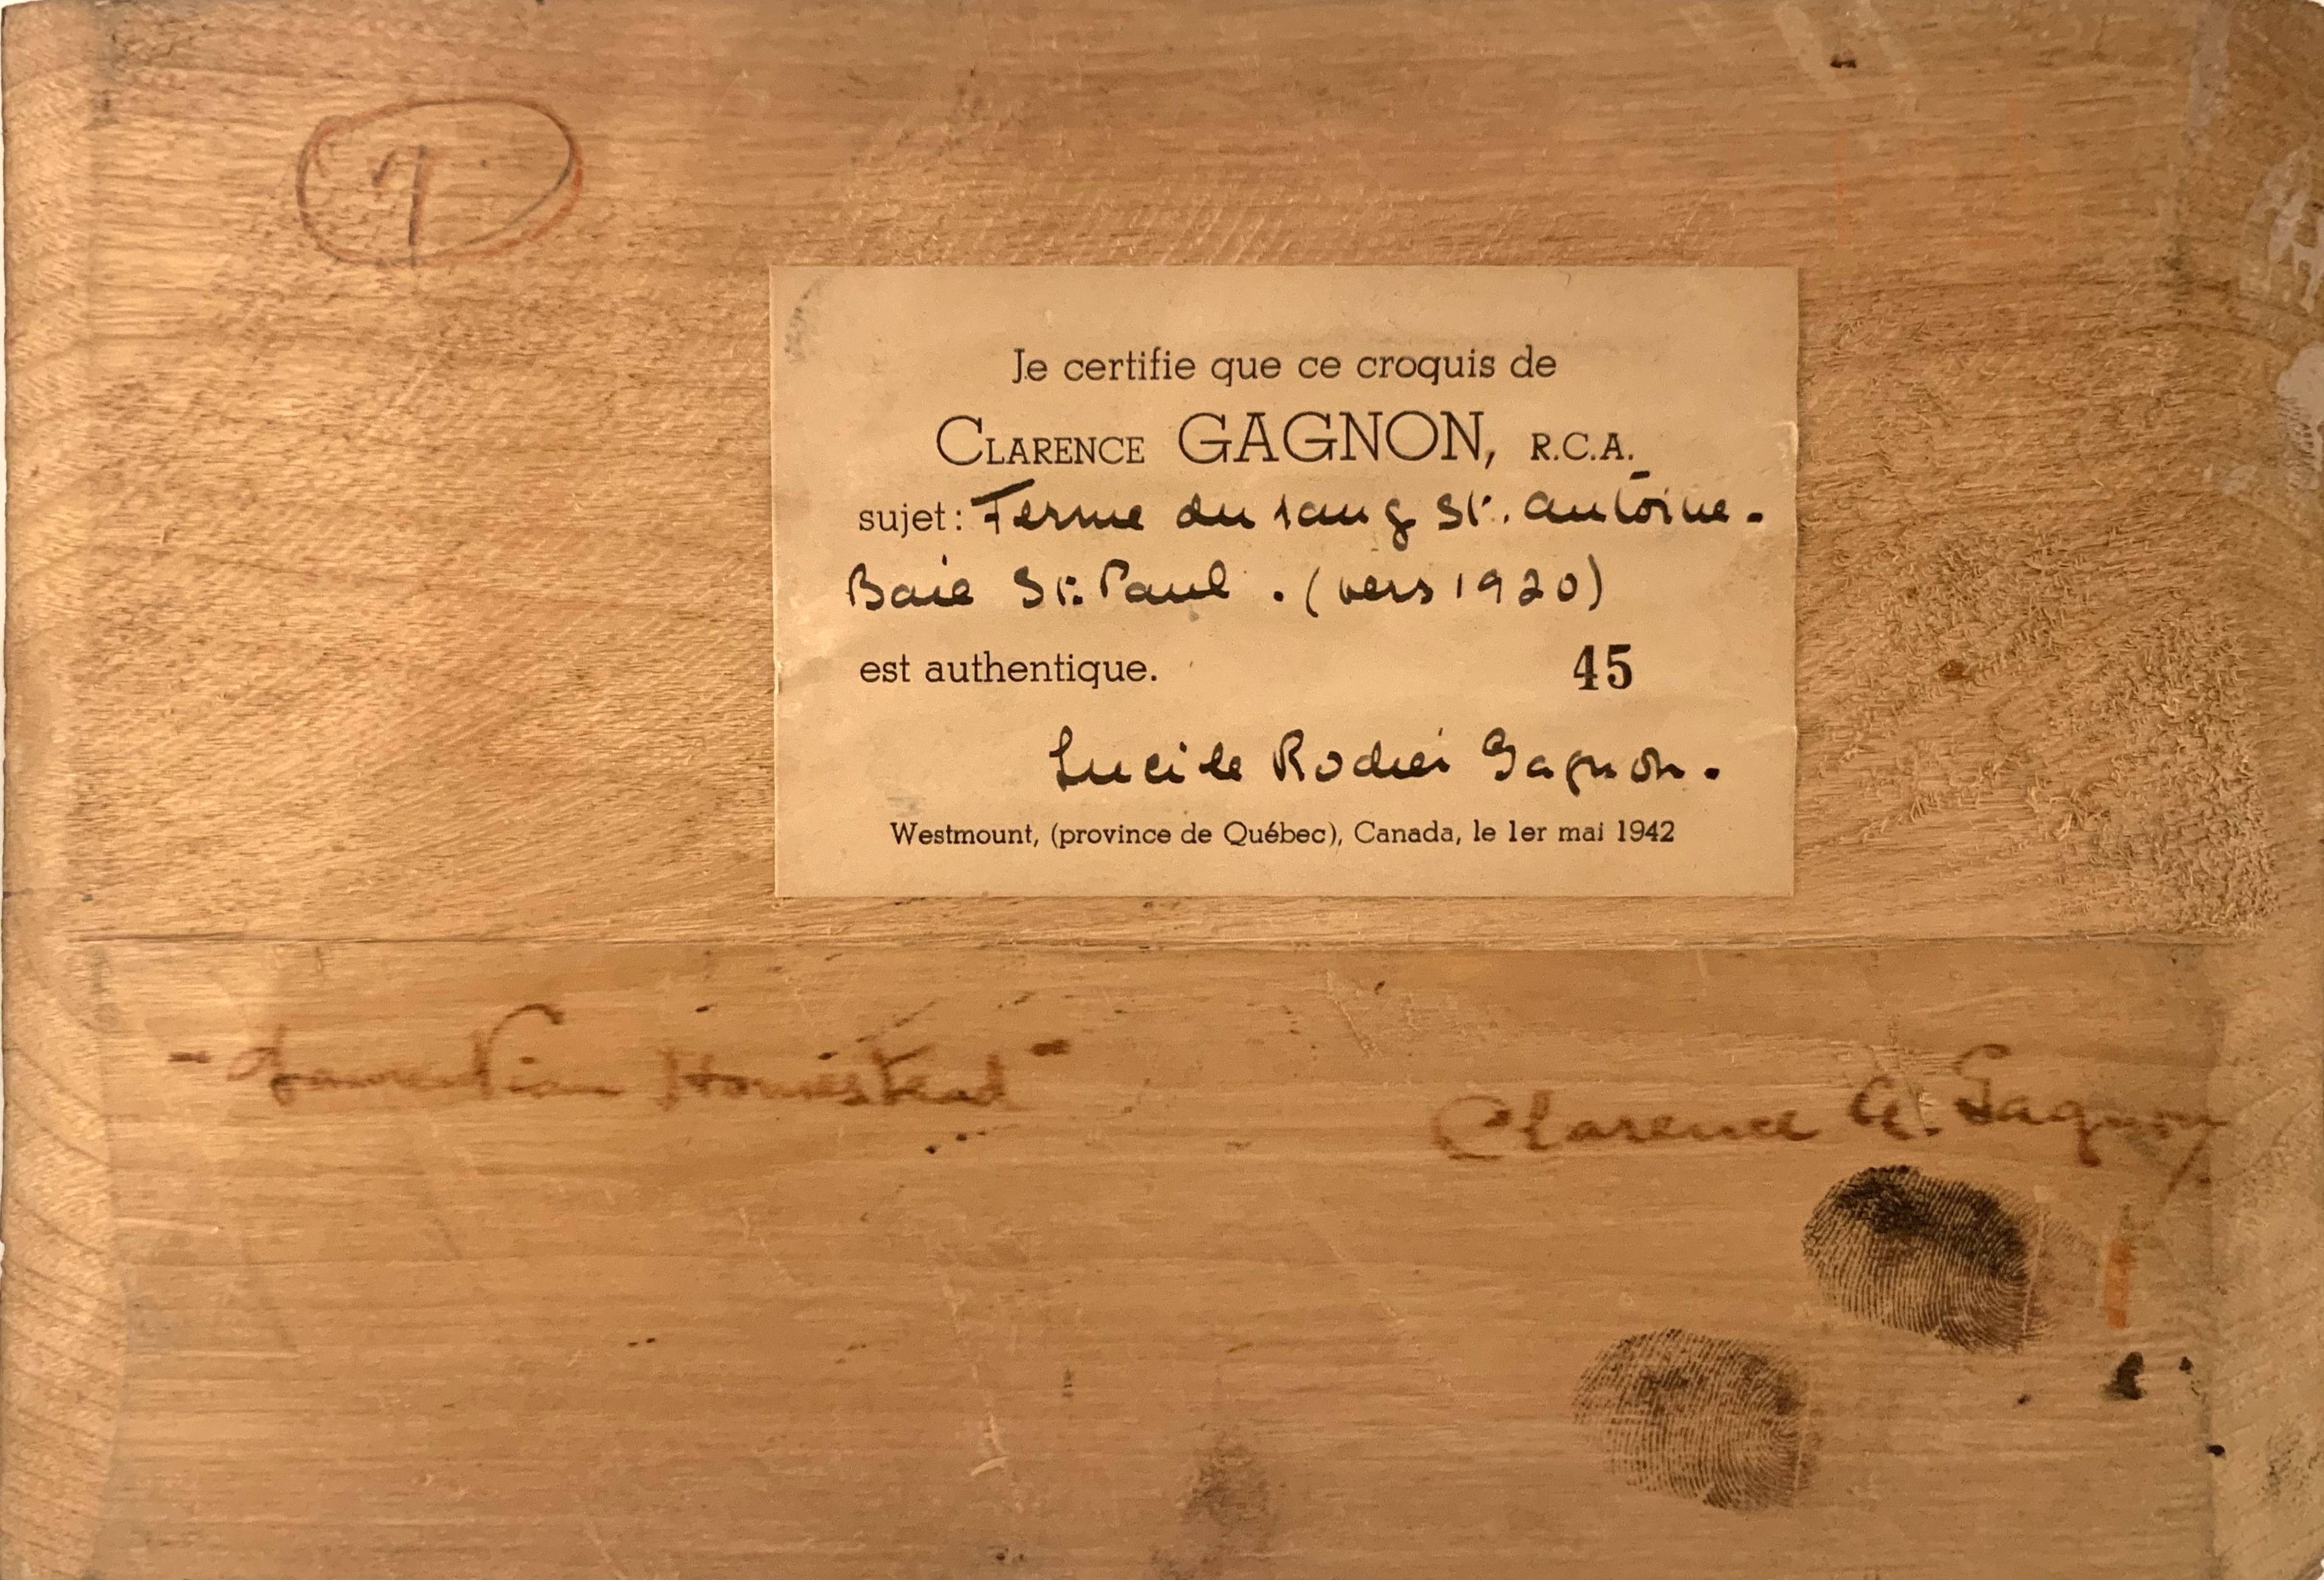 Verso of Laurentian Homestead / Ferme du rang St Antoine, Baie St. Paul with artist’s title, his signature, his thumbprints, and Mme. Gagnon’s certification label